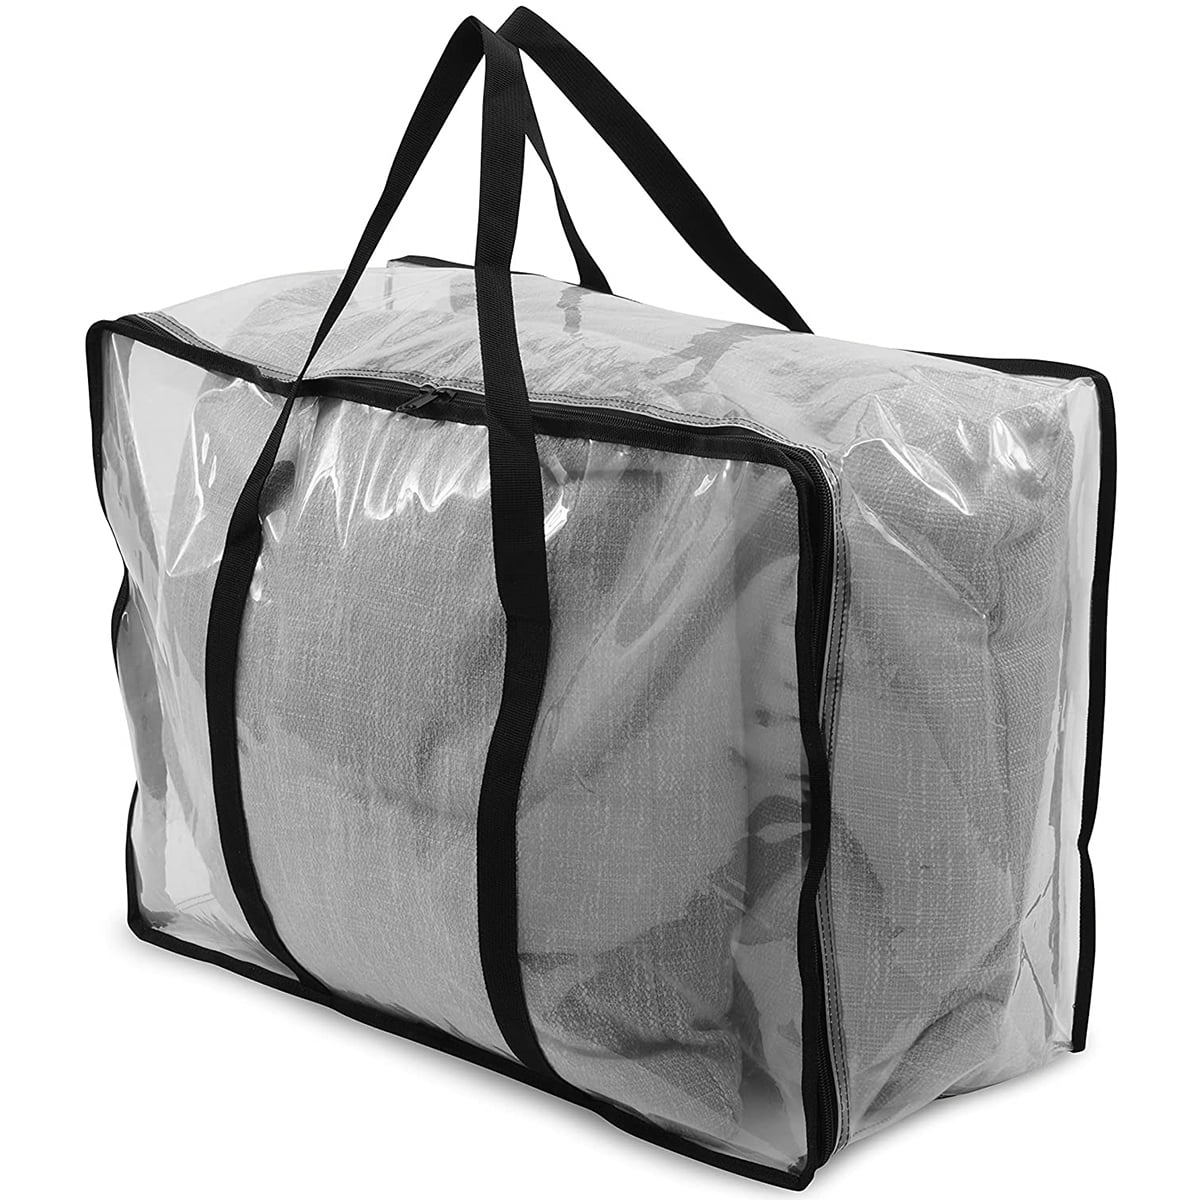 Clear Storage Bags With Zipper, 75L Extra Large Capacity - Closet